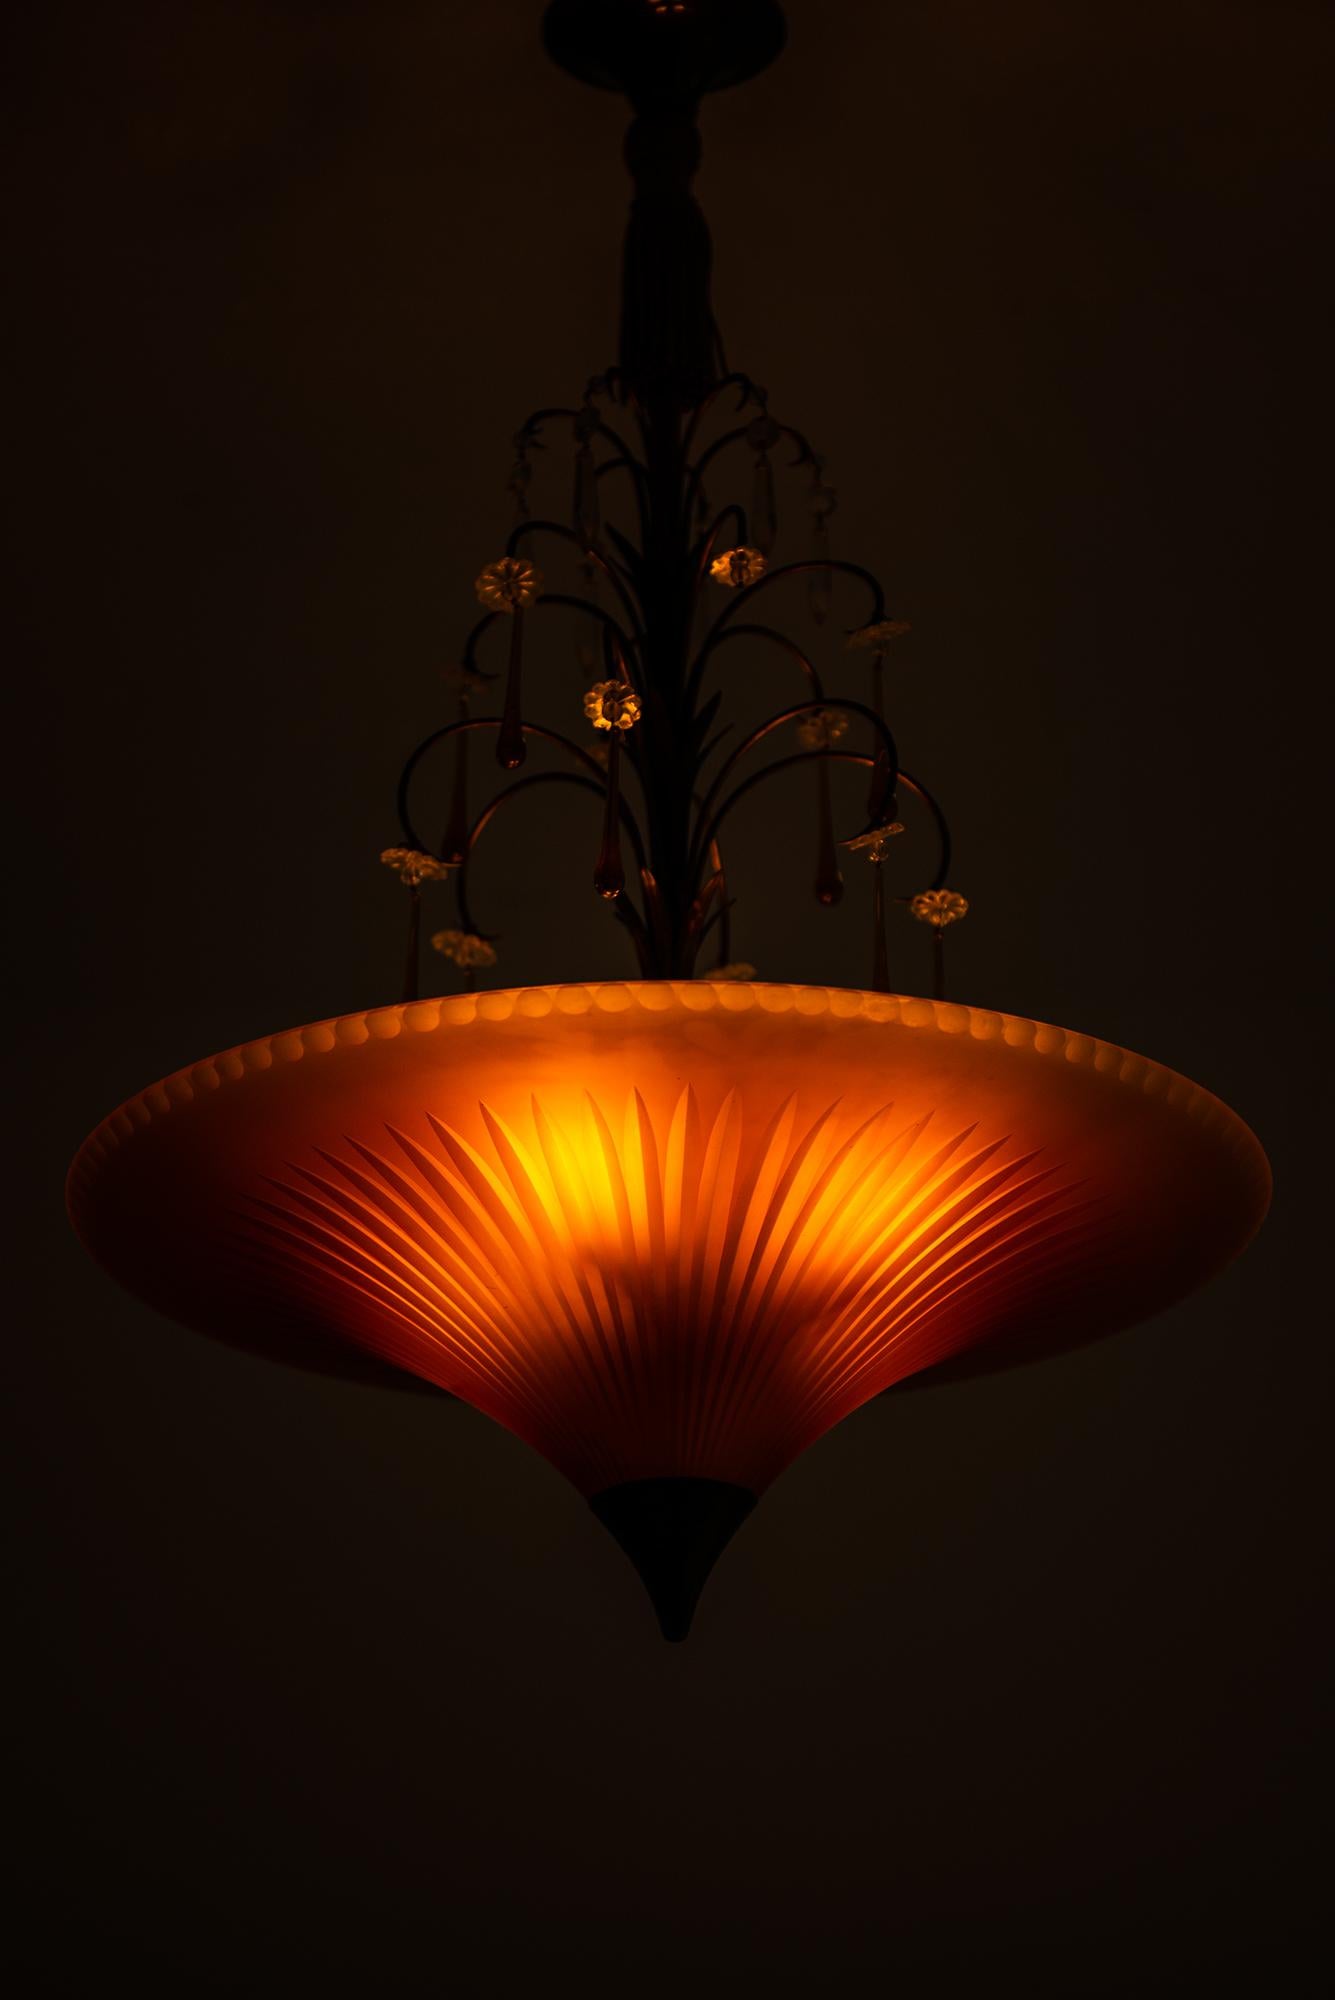 Ceiling Lamp Attributed to Elis Bergh Produced by Böhlmarks in Sweden In Good Condition For Sale In Limhamn, Skåne län